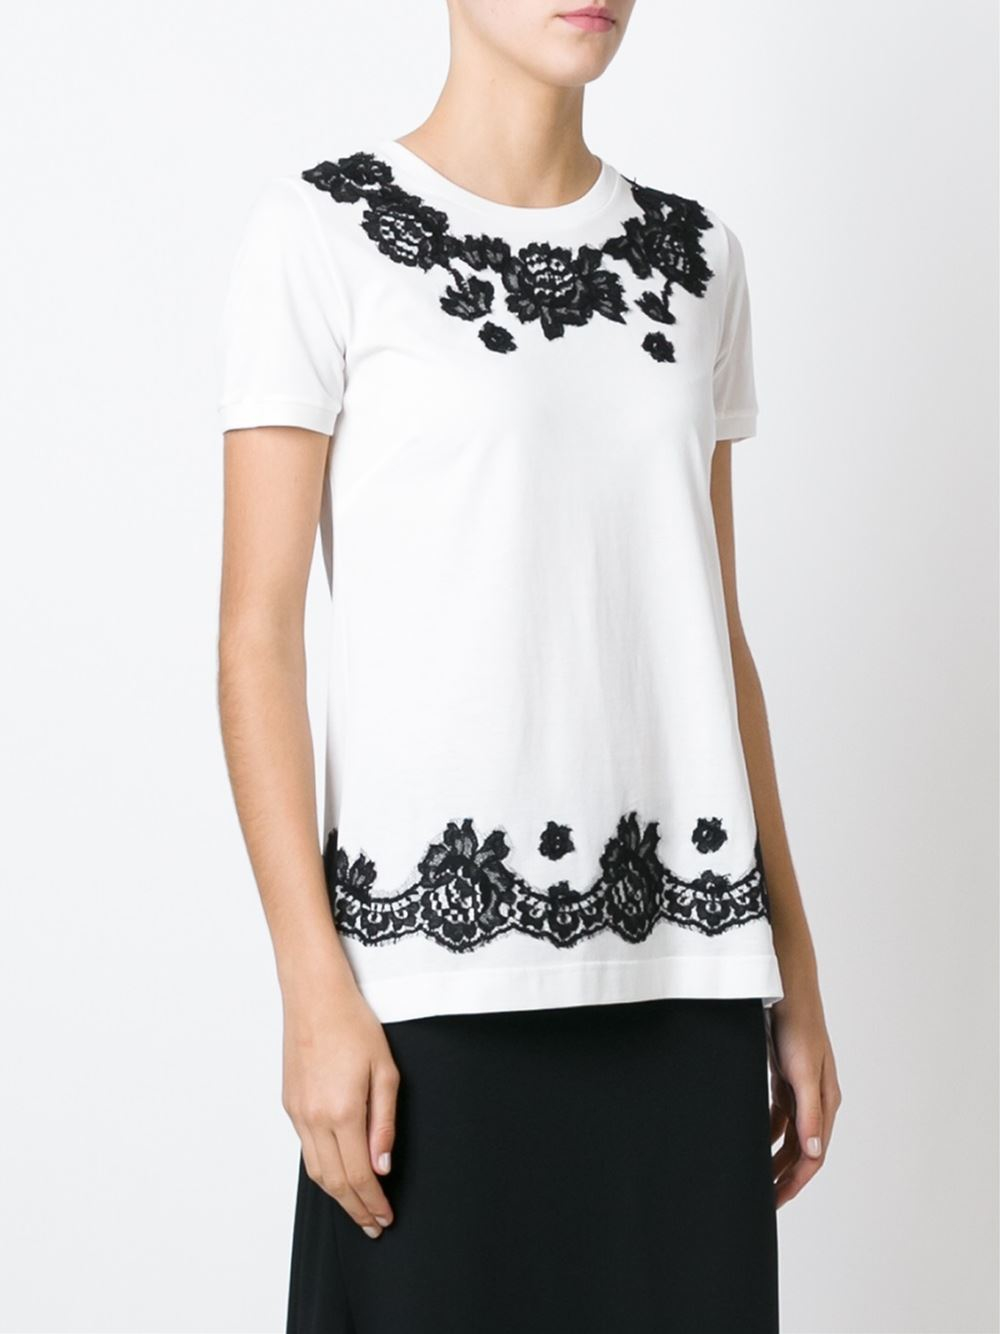 Dolce & gabbana Floral Lace Embellished T-shirt in Black (white) | Lyst